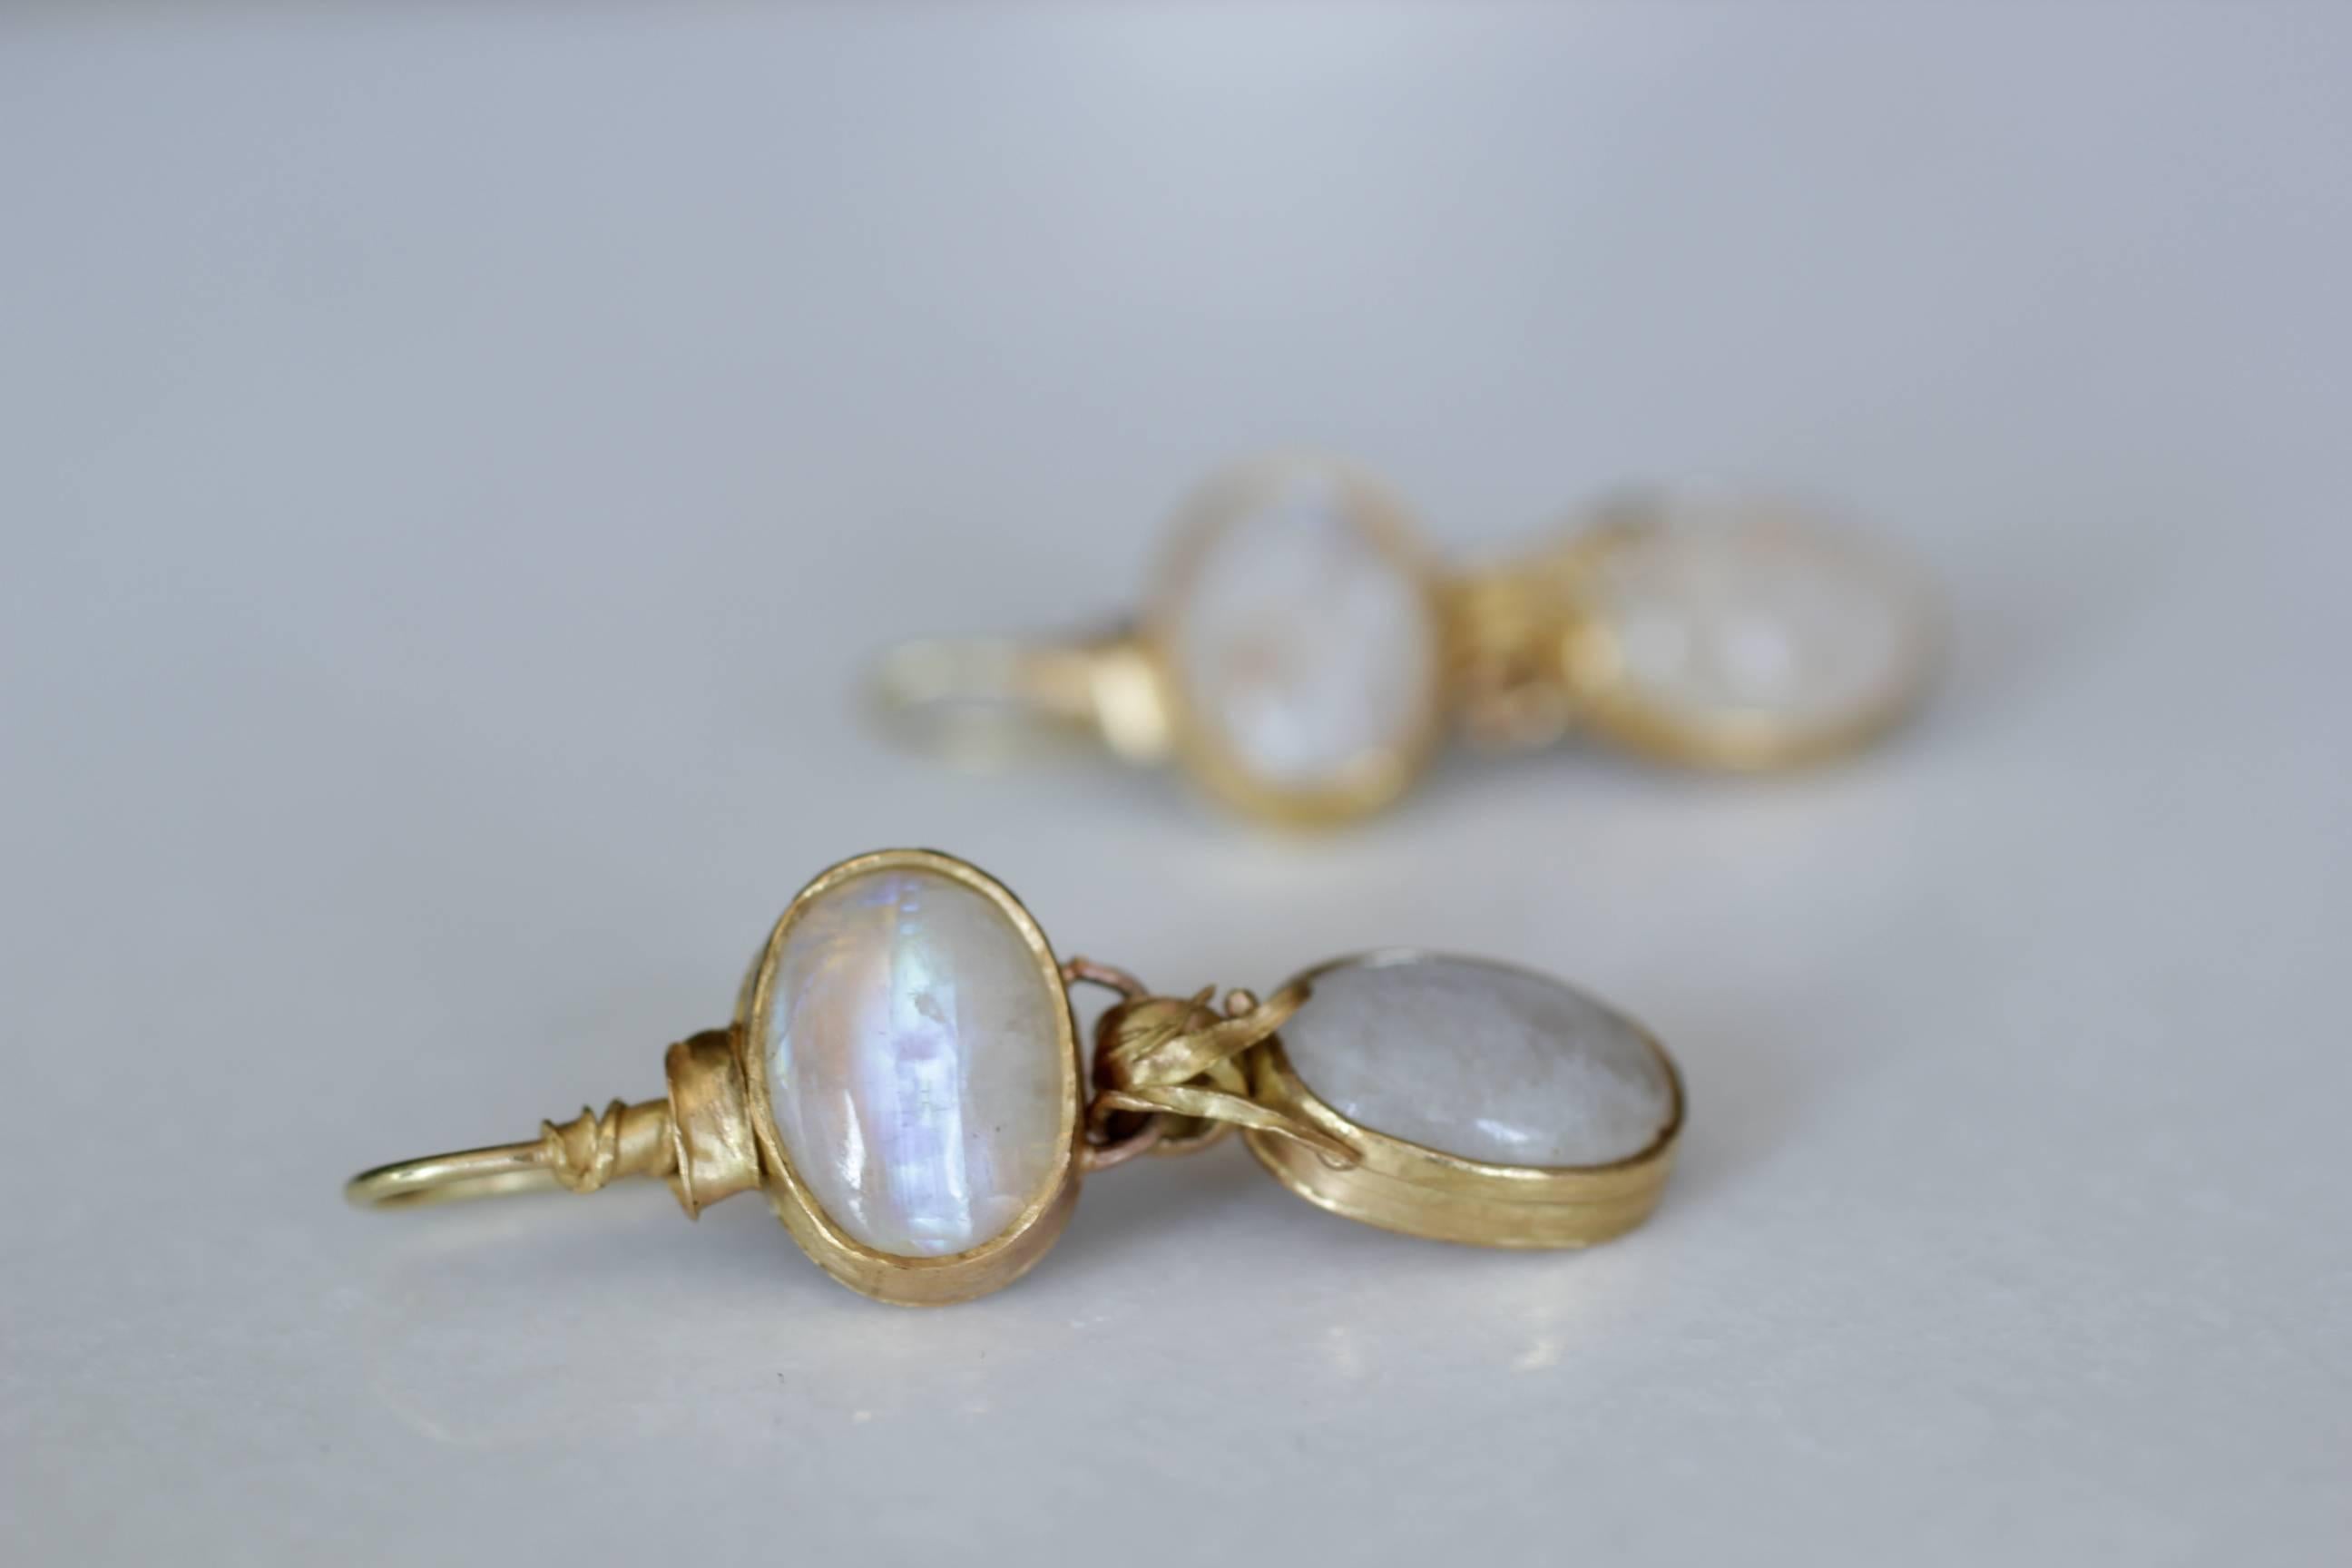 One-of-a-kind handmade 21K gold dangle drop earrings set with moonstones, inspired by the organic shapes of the sea and blades of grass. Beautiful Moonlight Earrings. Feminine and elegant, these earrings will surely start a conversation.

The